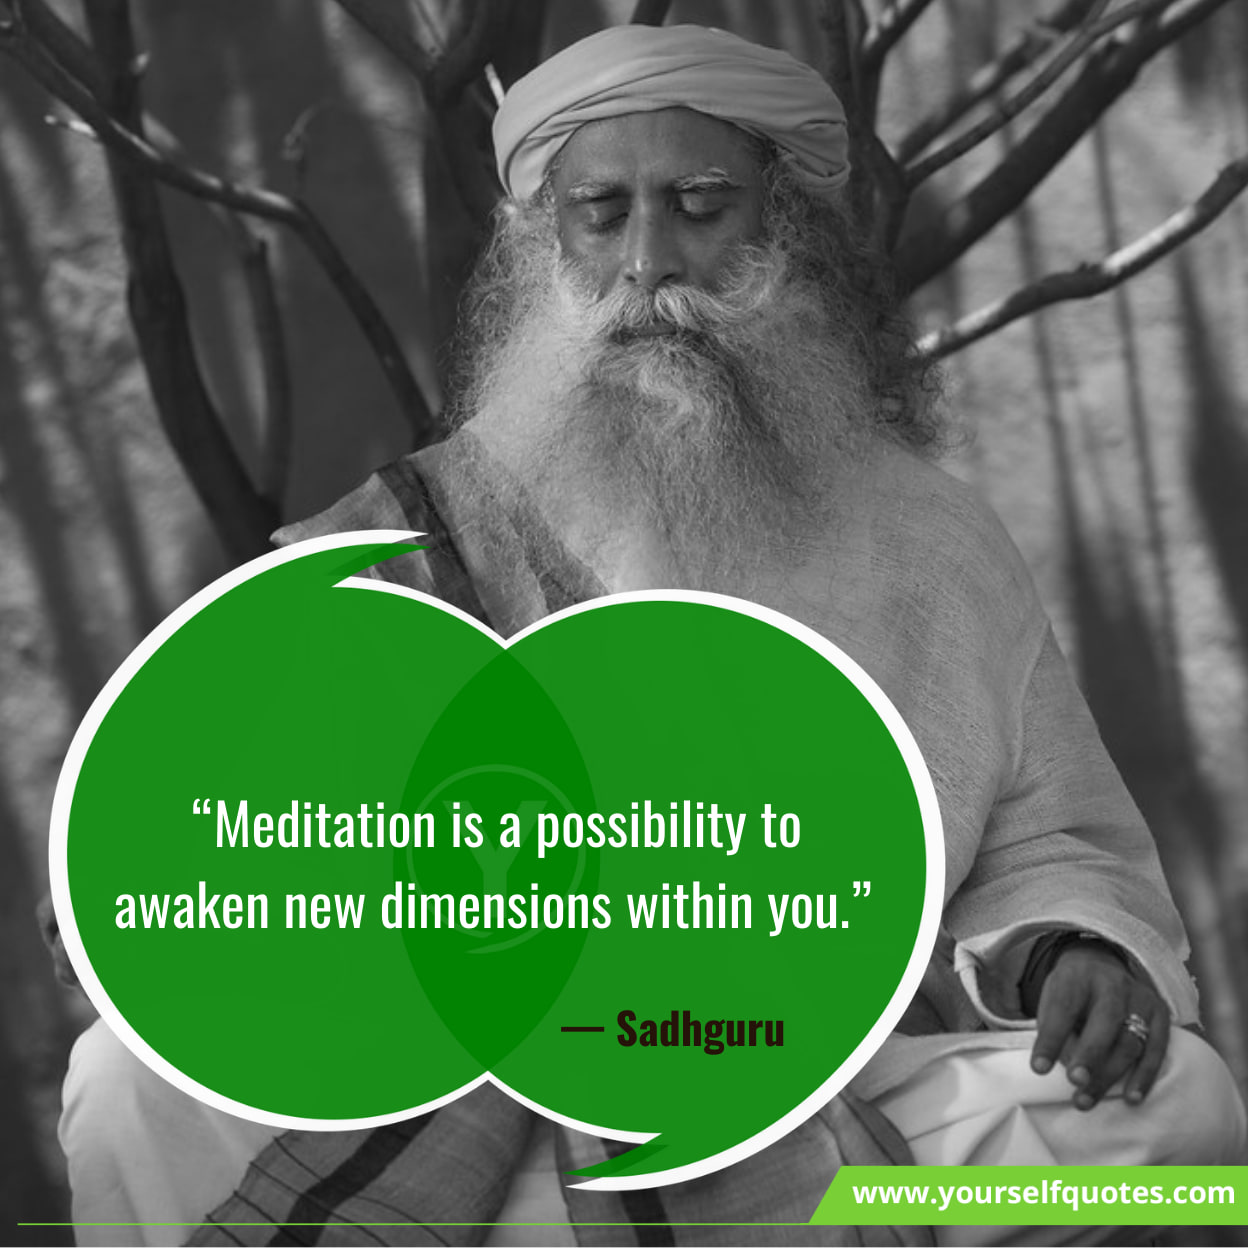 Famous Quotes About Meditation